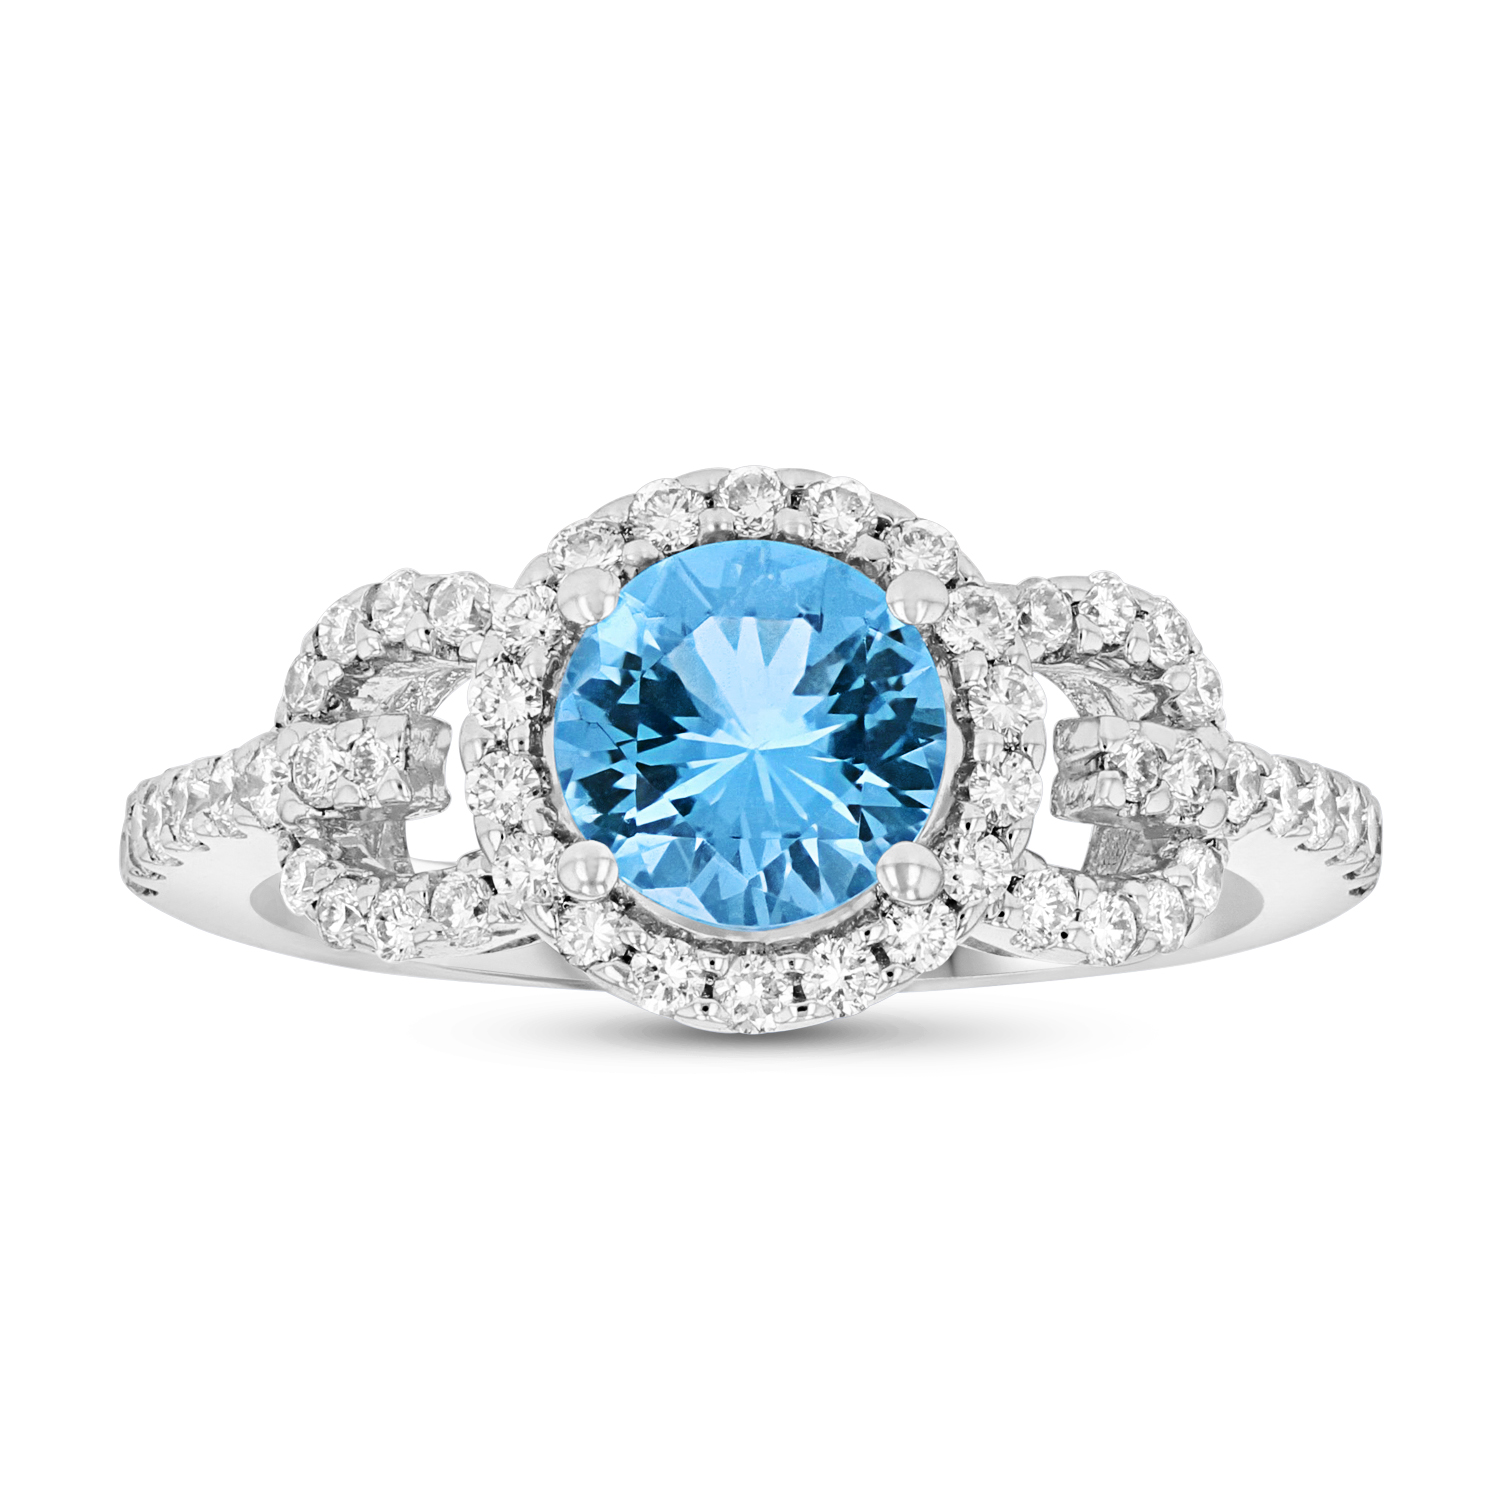 View Diamond and Blue Topaz Ring in 14k White Gold